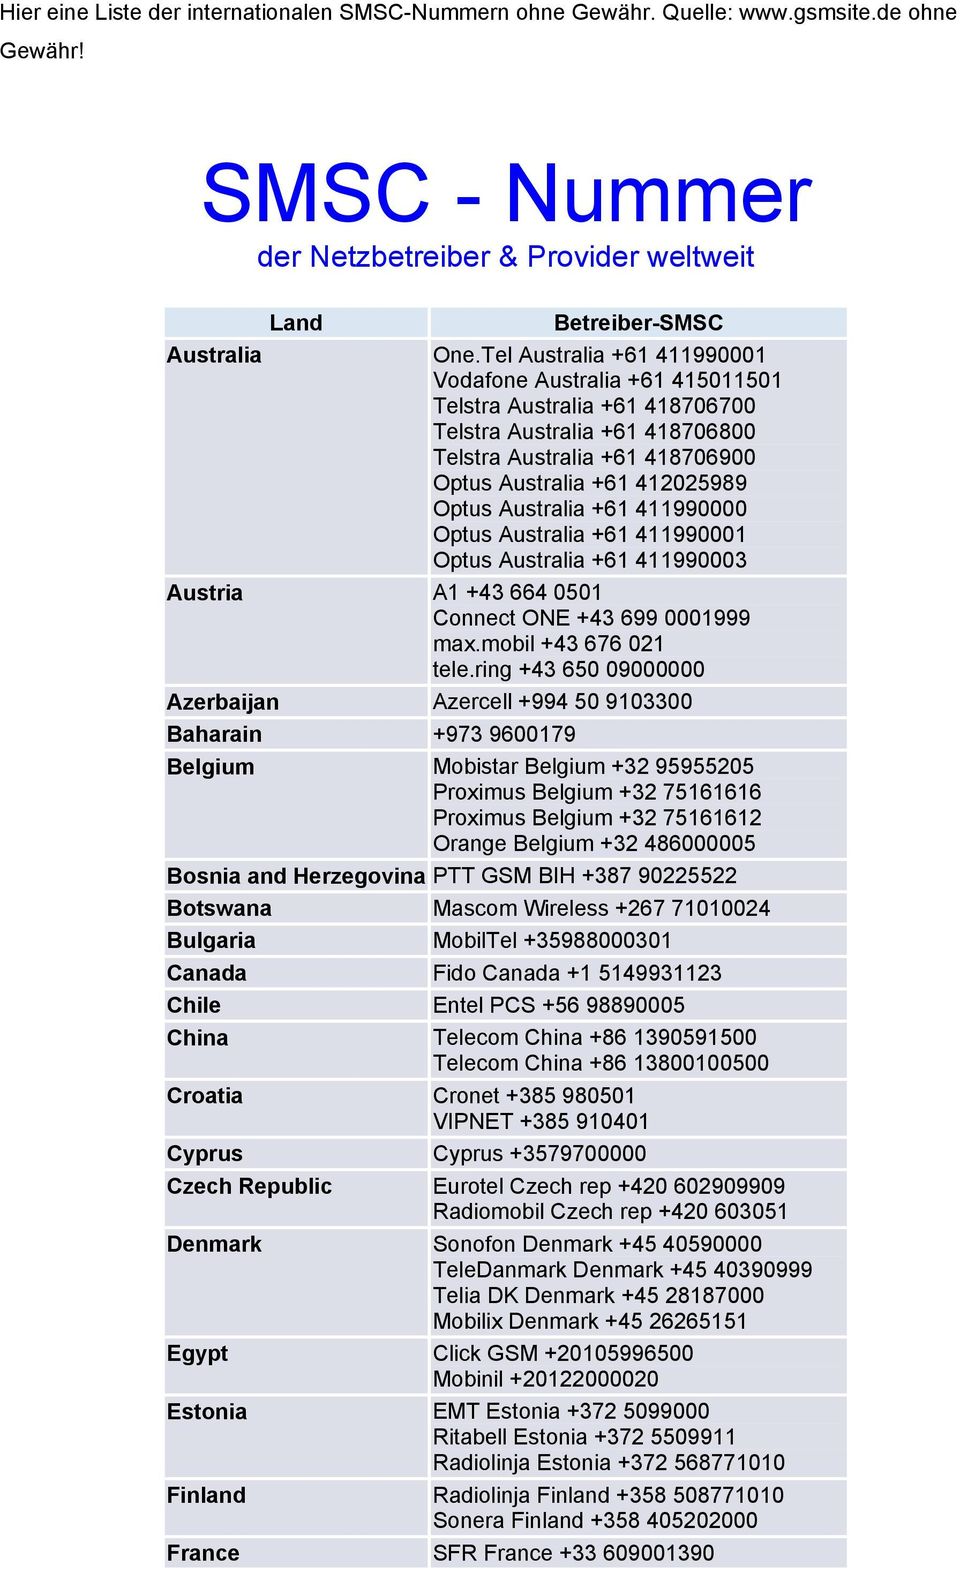 Australia +61 411990000 Optus Australia +61 411990001 Optus Australia +61 411990003 Austria A1 +43 664 0501 Connect ONE +43 699 0001999 max.mobil +43 676 021 tele.